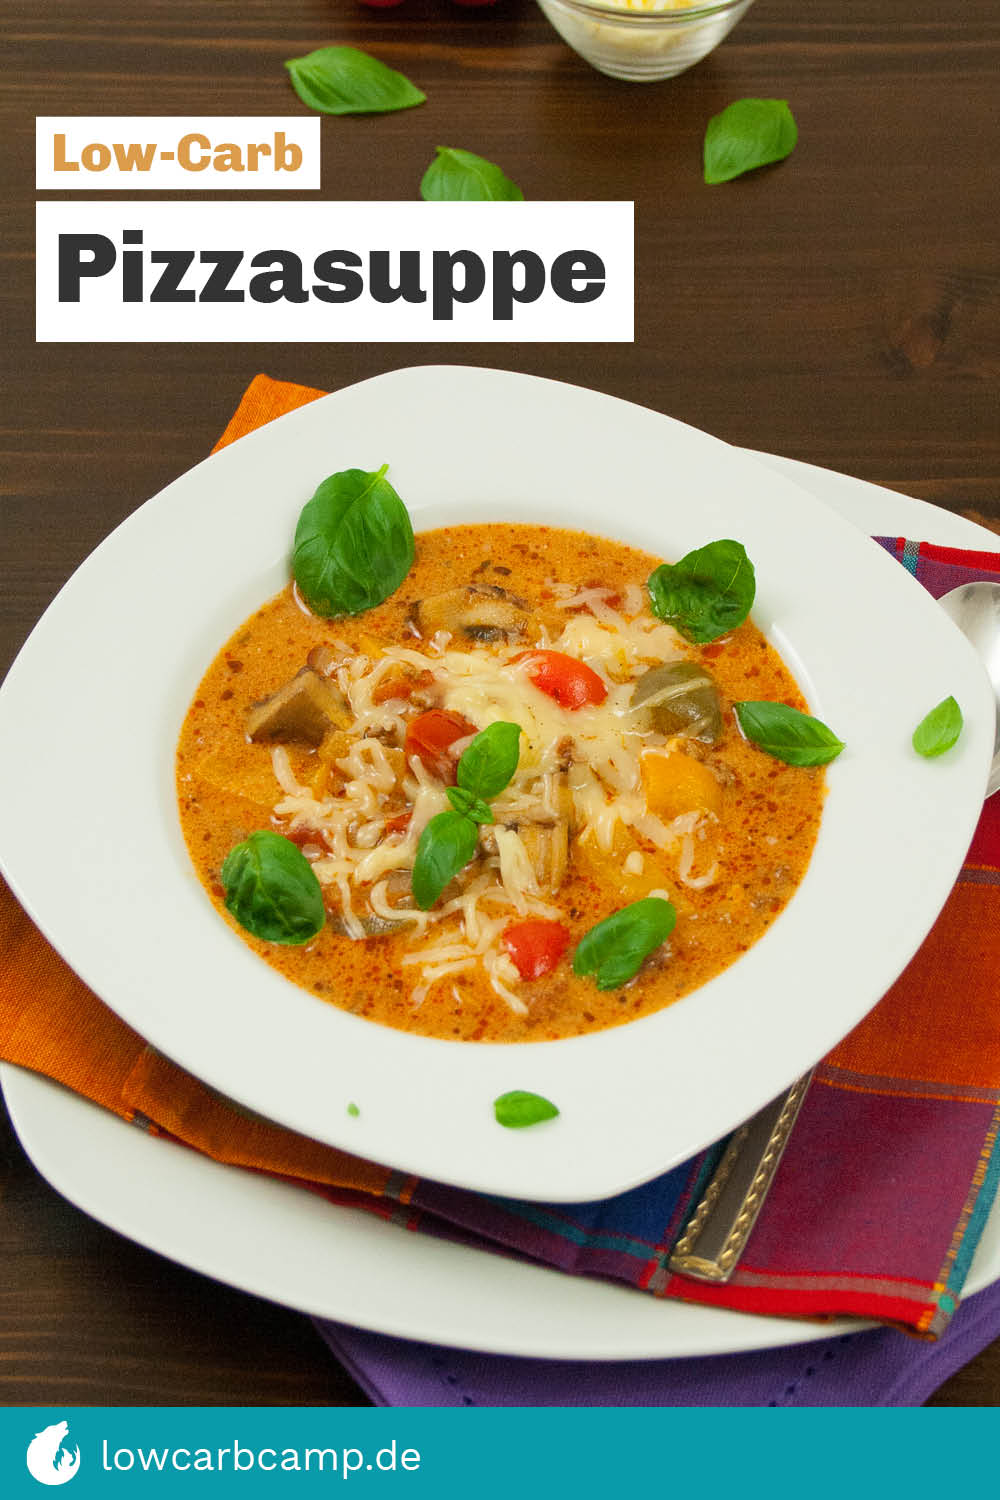 Low-Carb Pizzasuppe